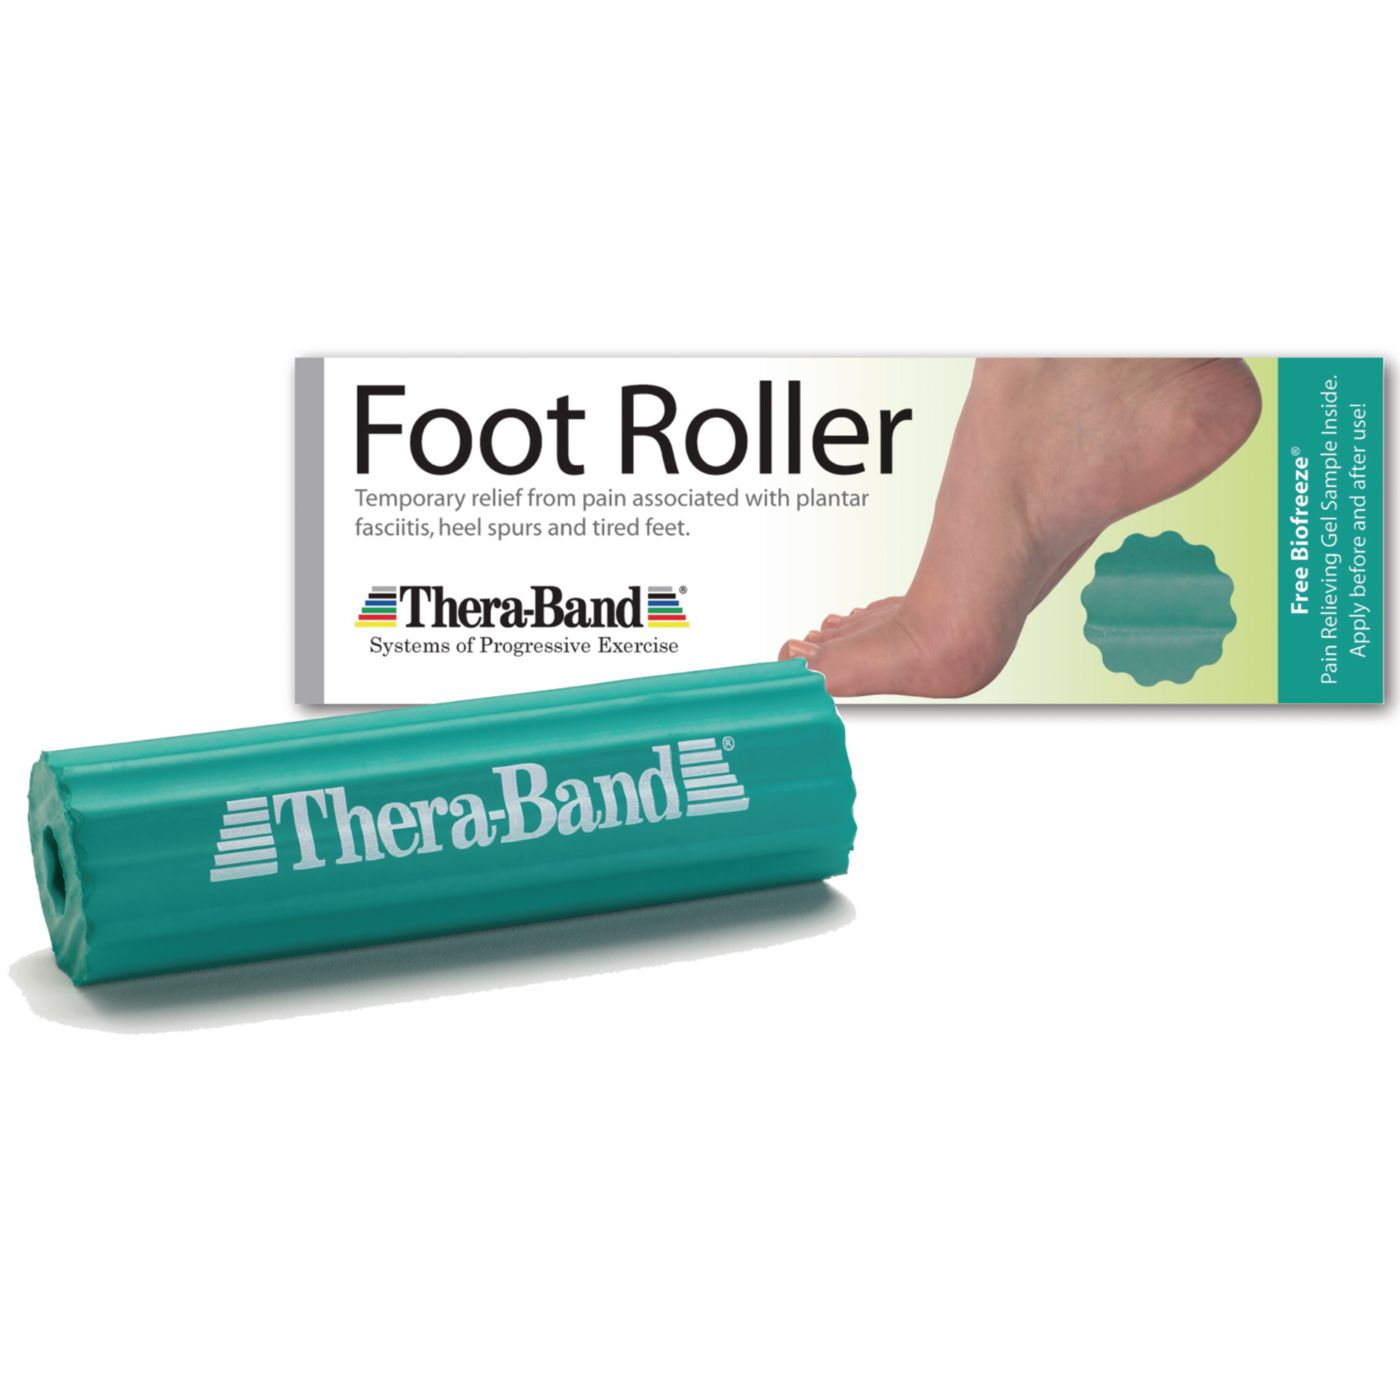 THERABAND Foot Roller Benefits